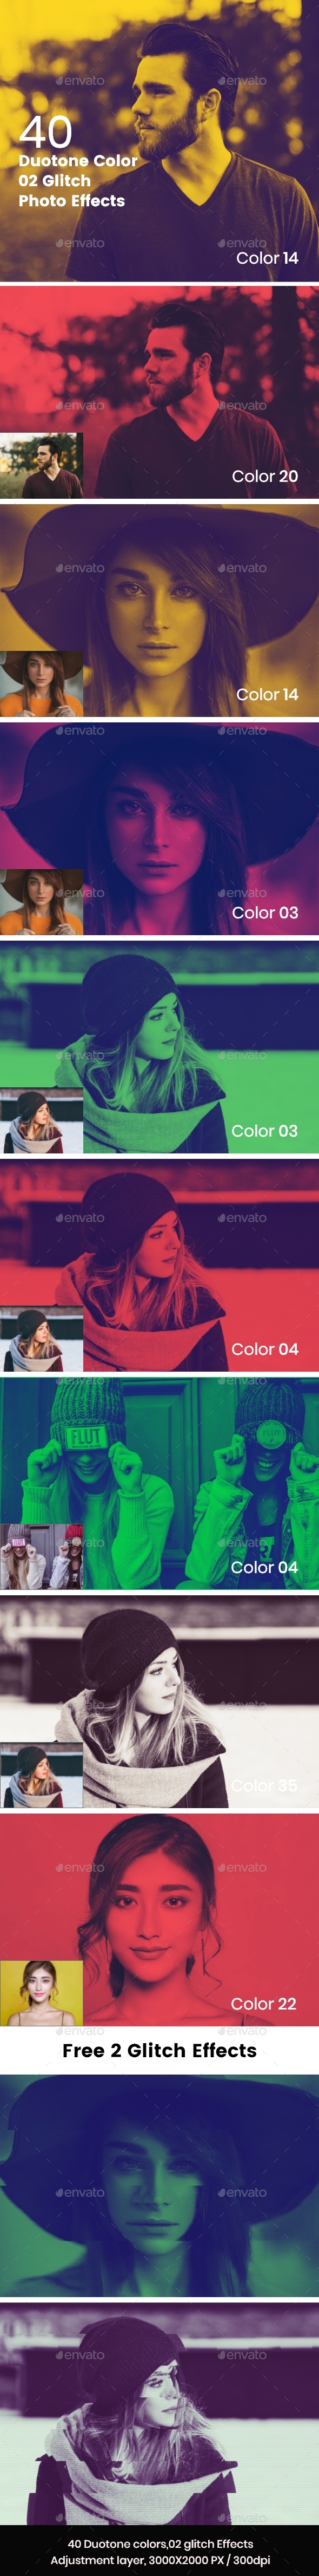 Duotone Color Effects Photo Template